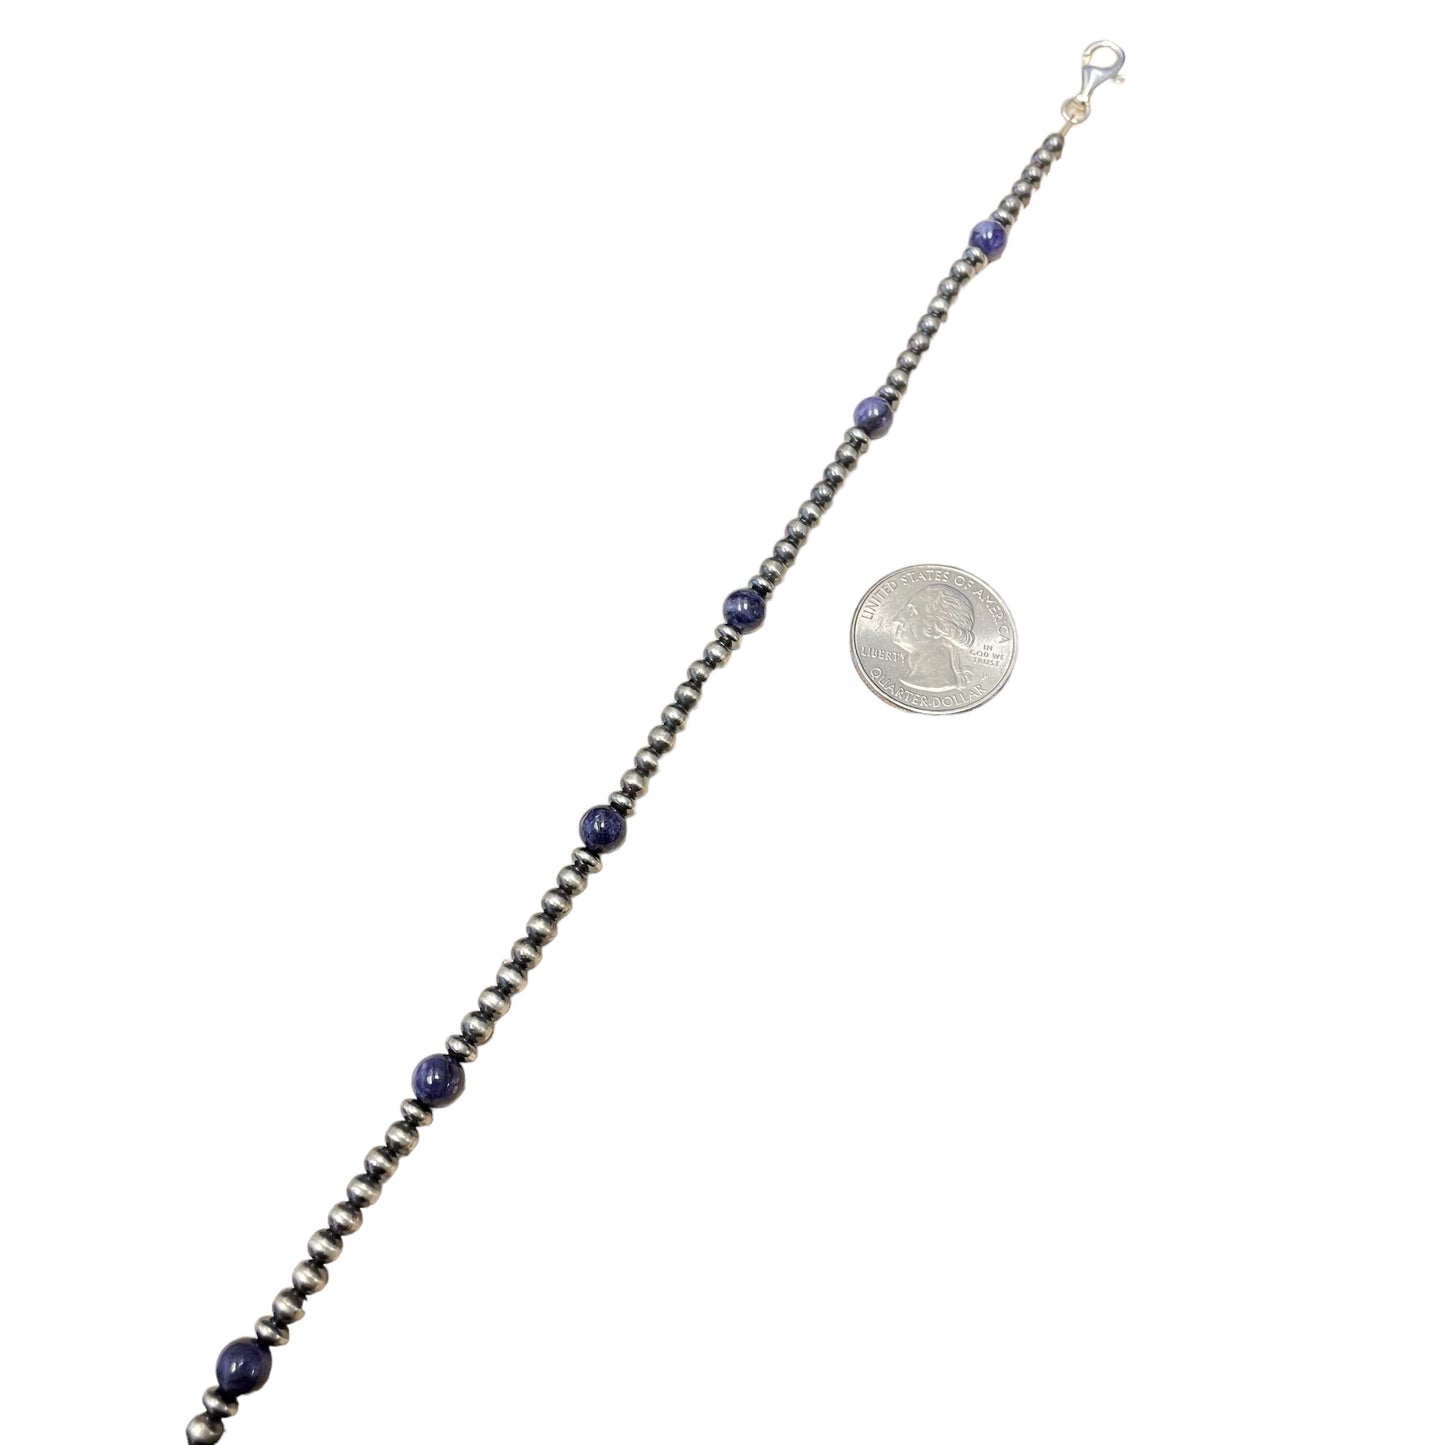 Charoite Desert Pearl Bead Necklace Sterling Silver